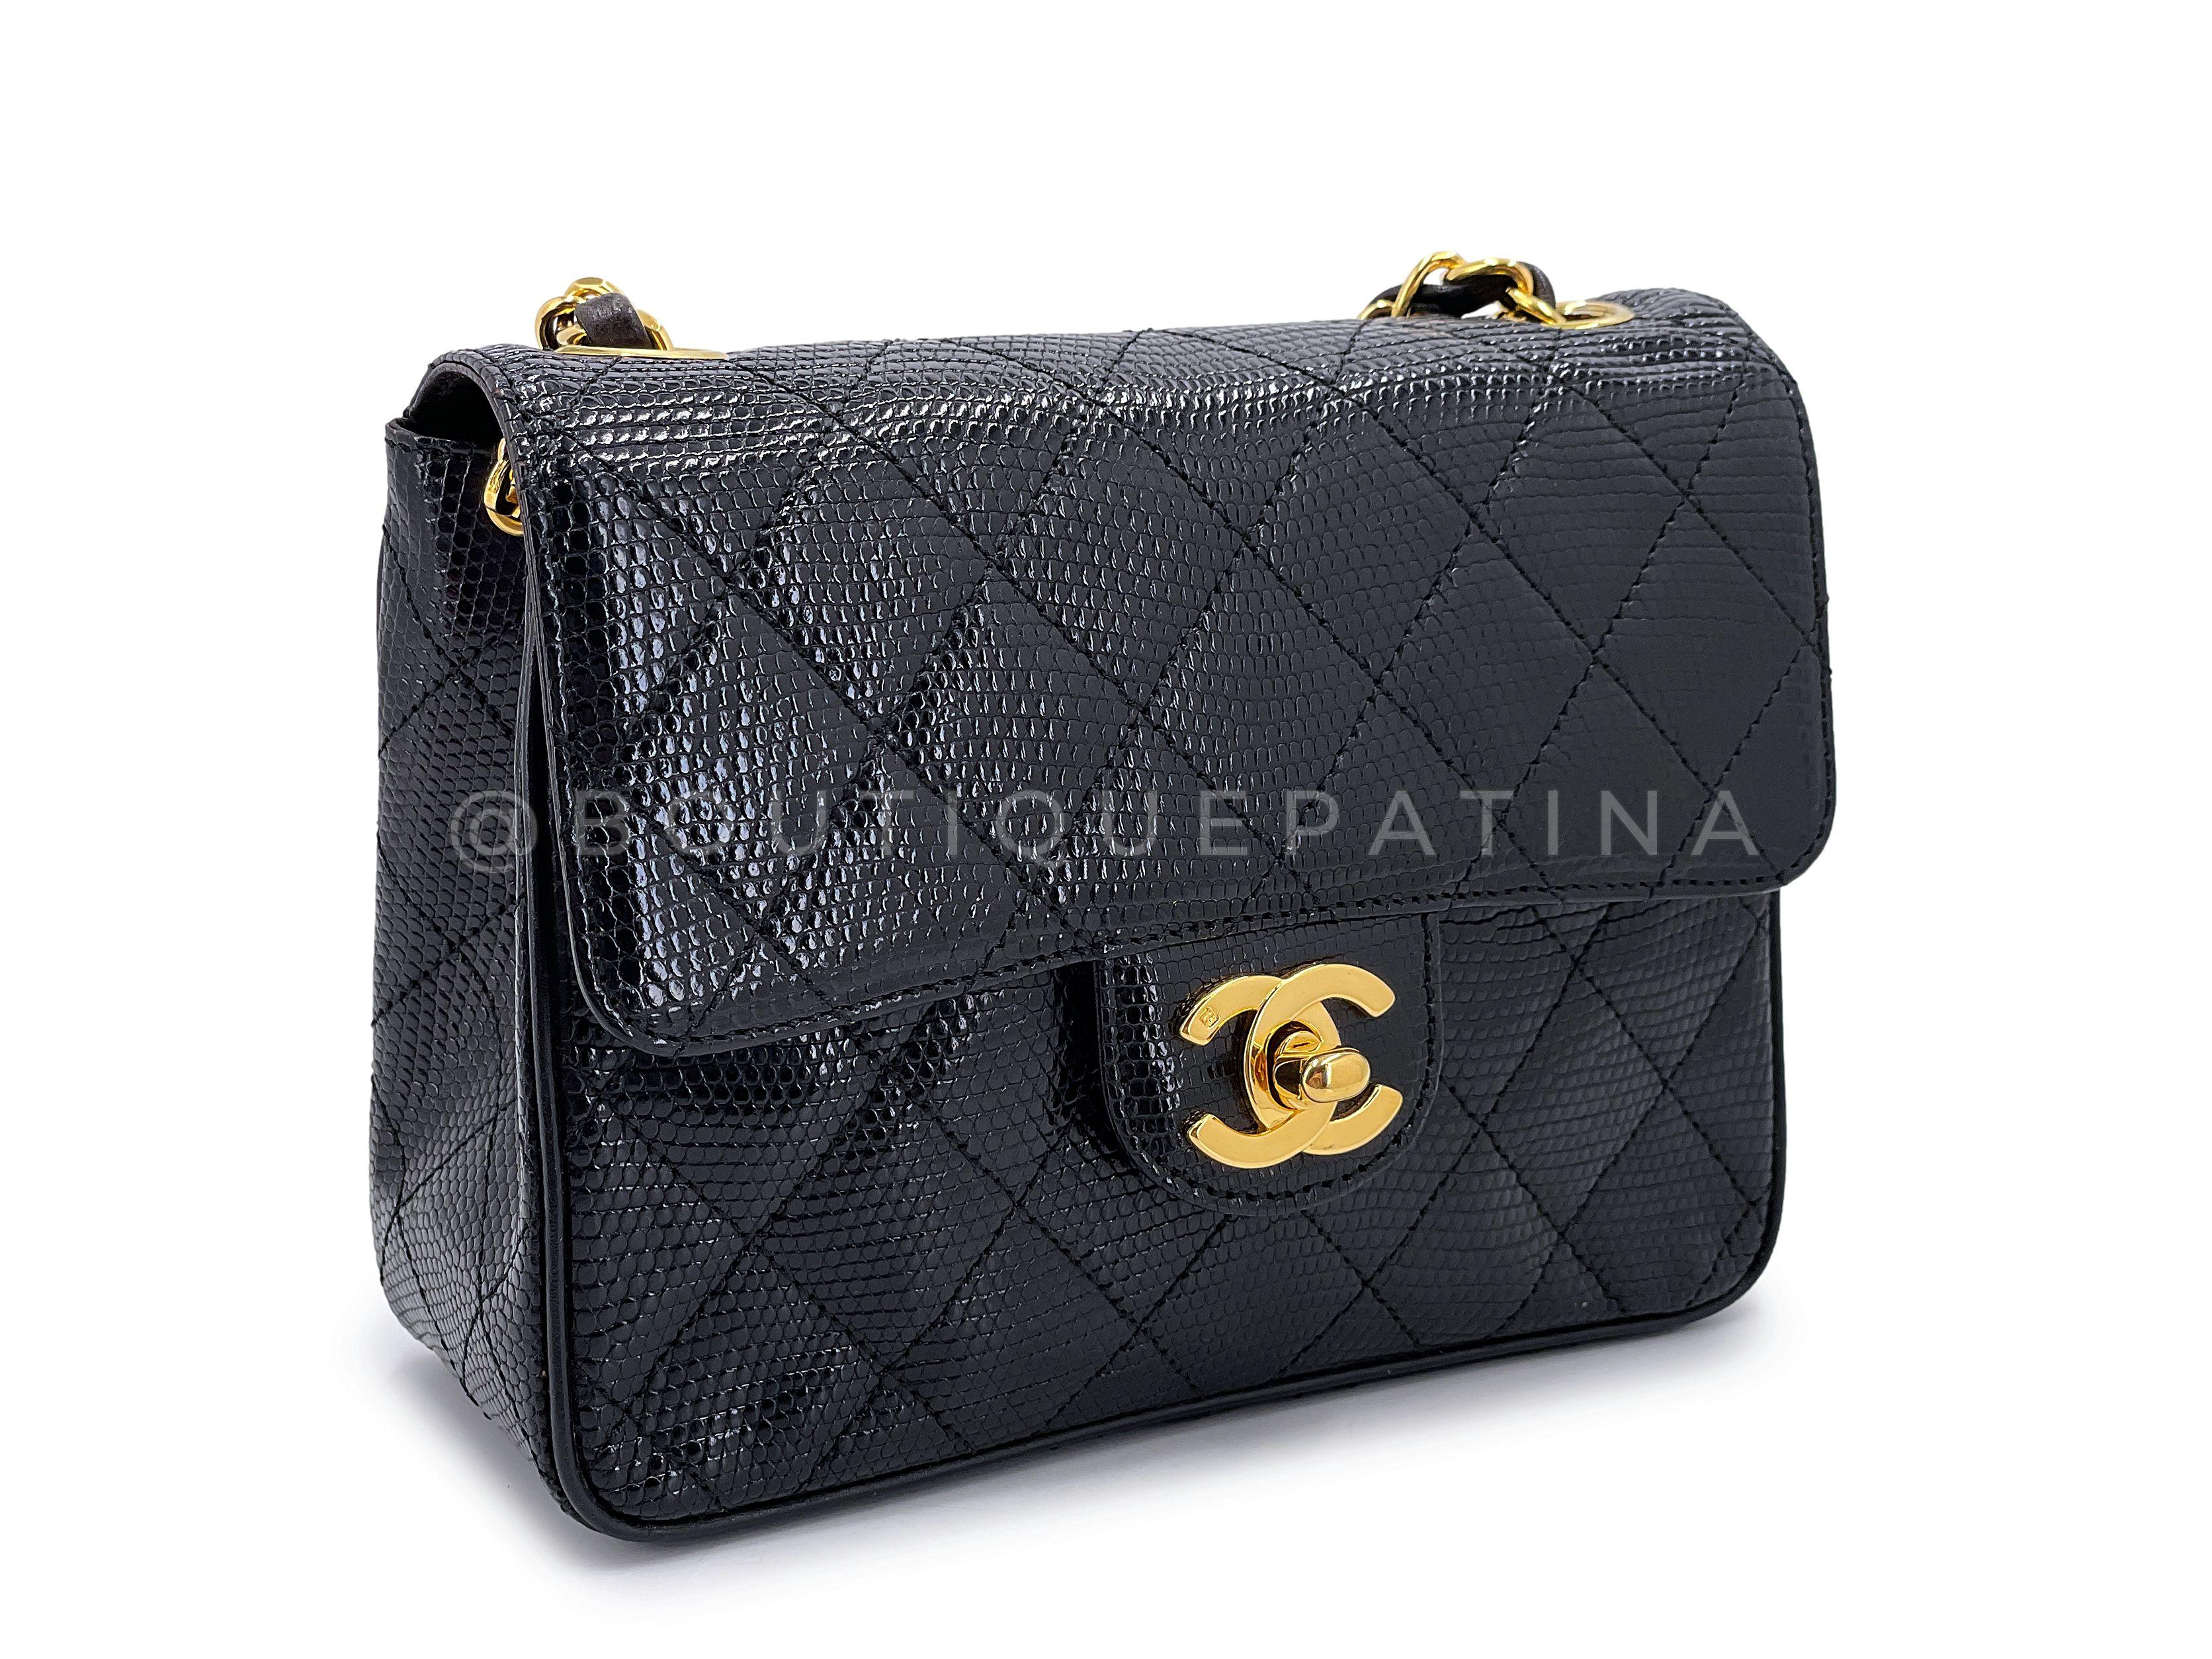 Chanel 1993 Vintage Black Lizard Square Mini Flap Bag 24k GHW 67241 In Excellent Condition For Sale In Costa Mesa, CA